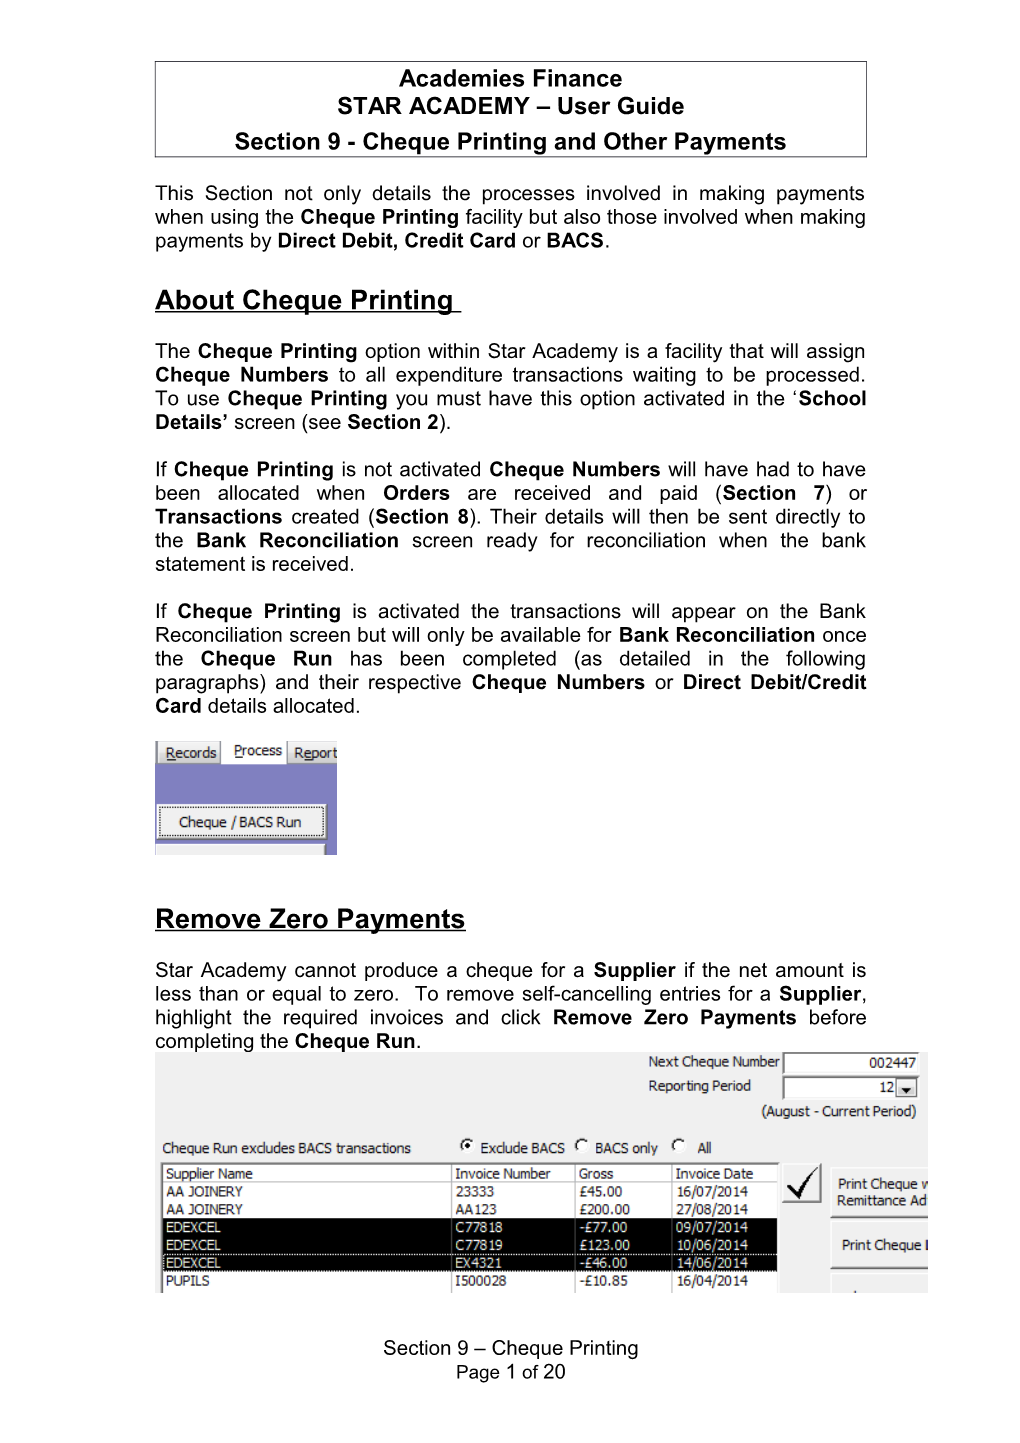 About Cheque Printing